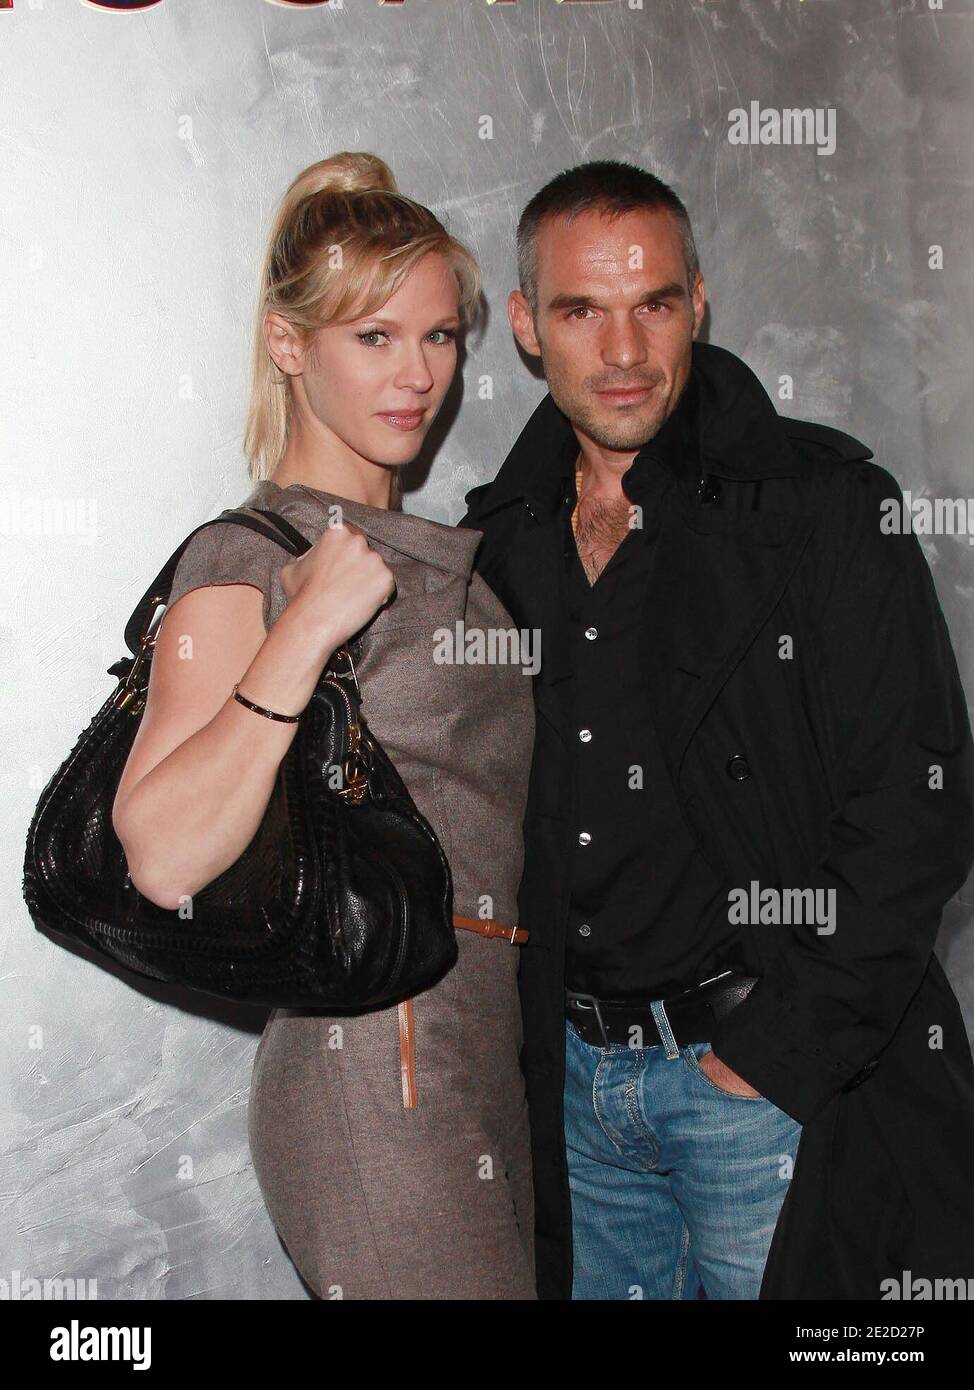 Lorie and Philippe Bas attending the 'Escada' party in Paris, France on  October 20, 2011. Photo by Denis Guignebourg/ABACAPRESS.COM Stock Photo -  Alamy